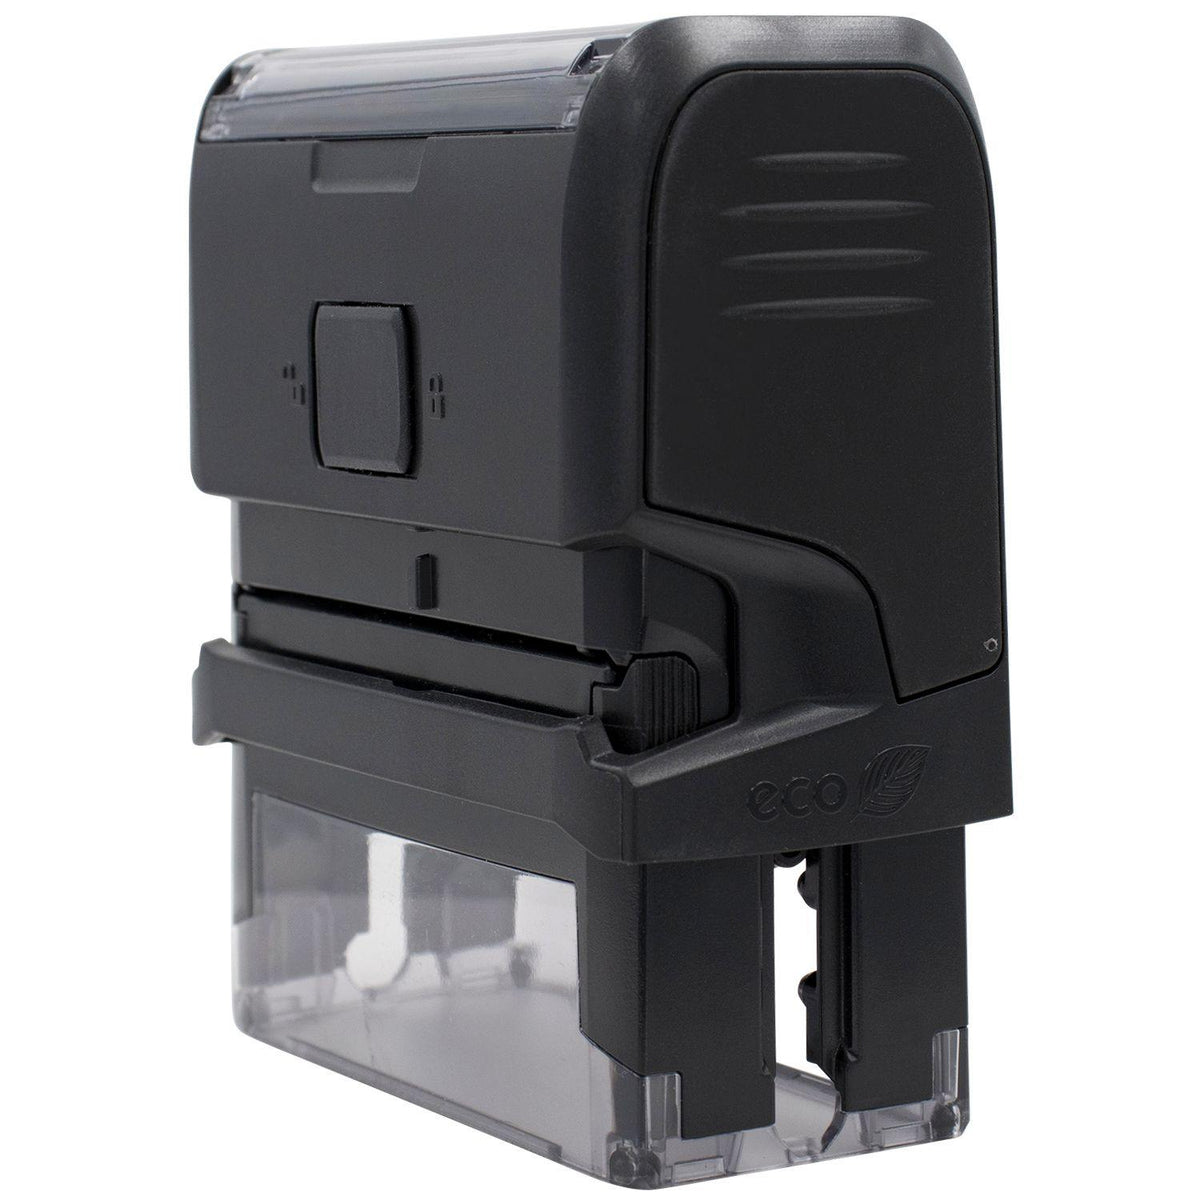 Large Self Inking Redacted Stamp - Engineer Seal Stamps - Brand_Trodat, Impression Size_Large, Stamp Type_Self-Inking Stamp, Type of Use_Legal